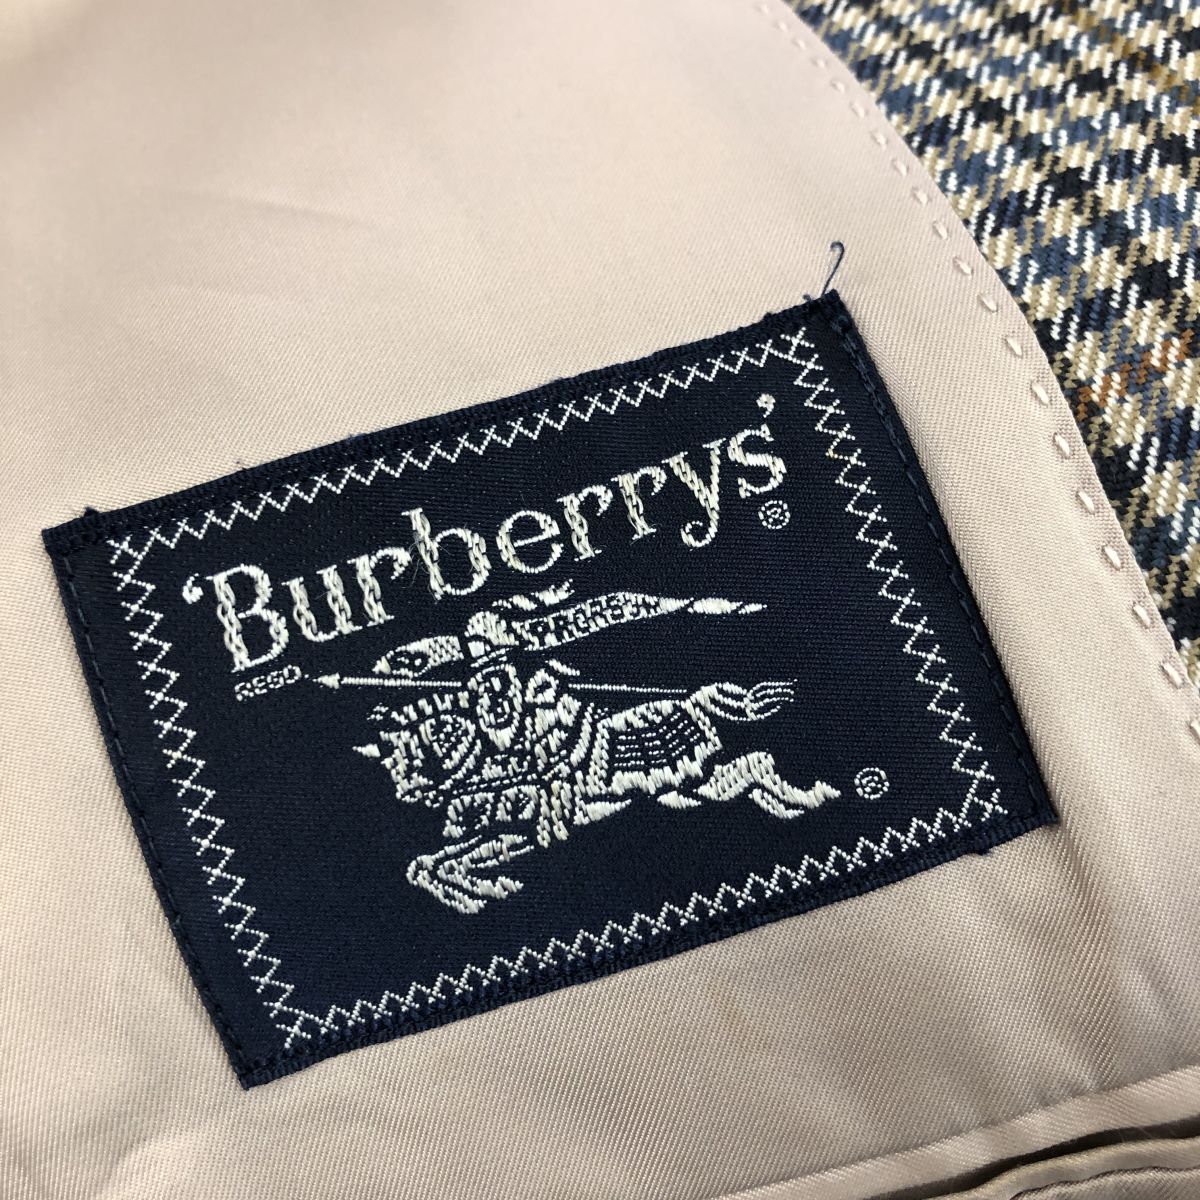 M1898-F-N* 90s * old * burberrys Burberry tailored jacket single unlined in the back * sizeA4 wool 100 Brown old clothes men's spring 